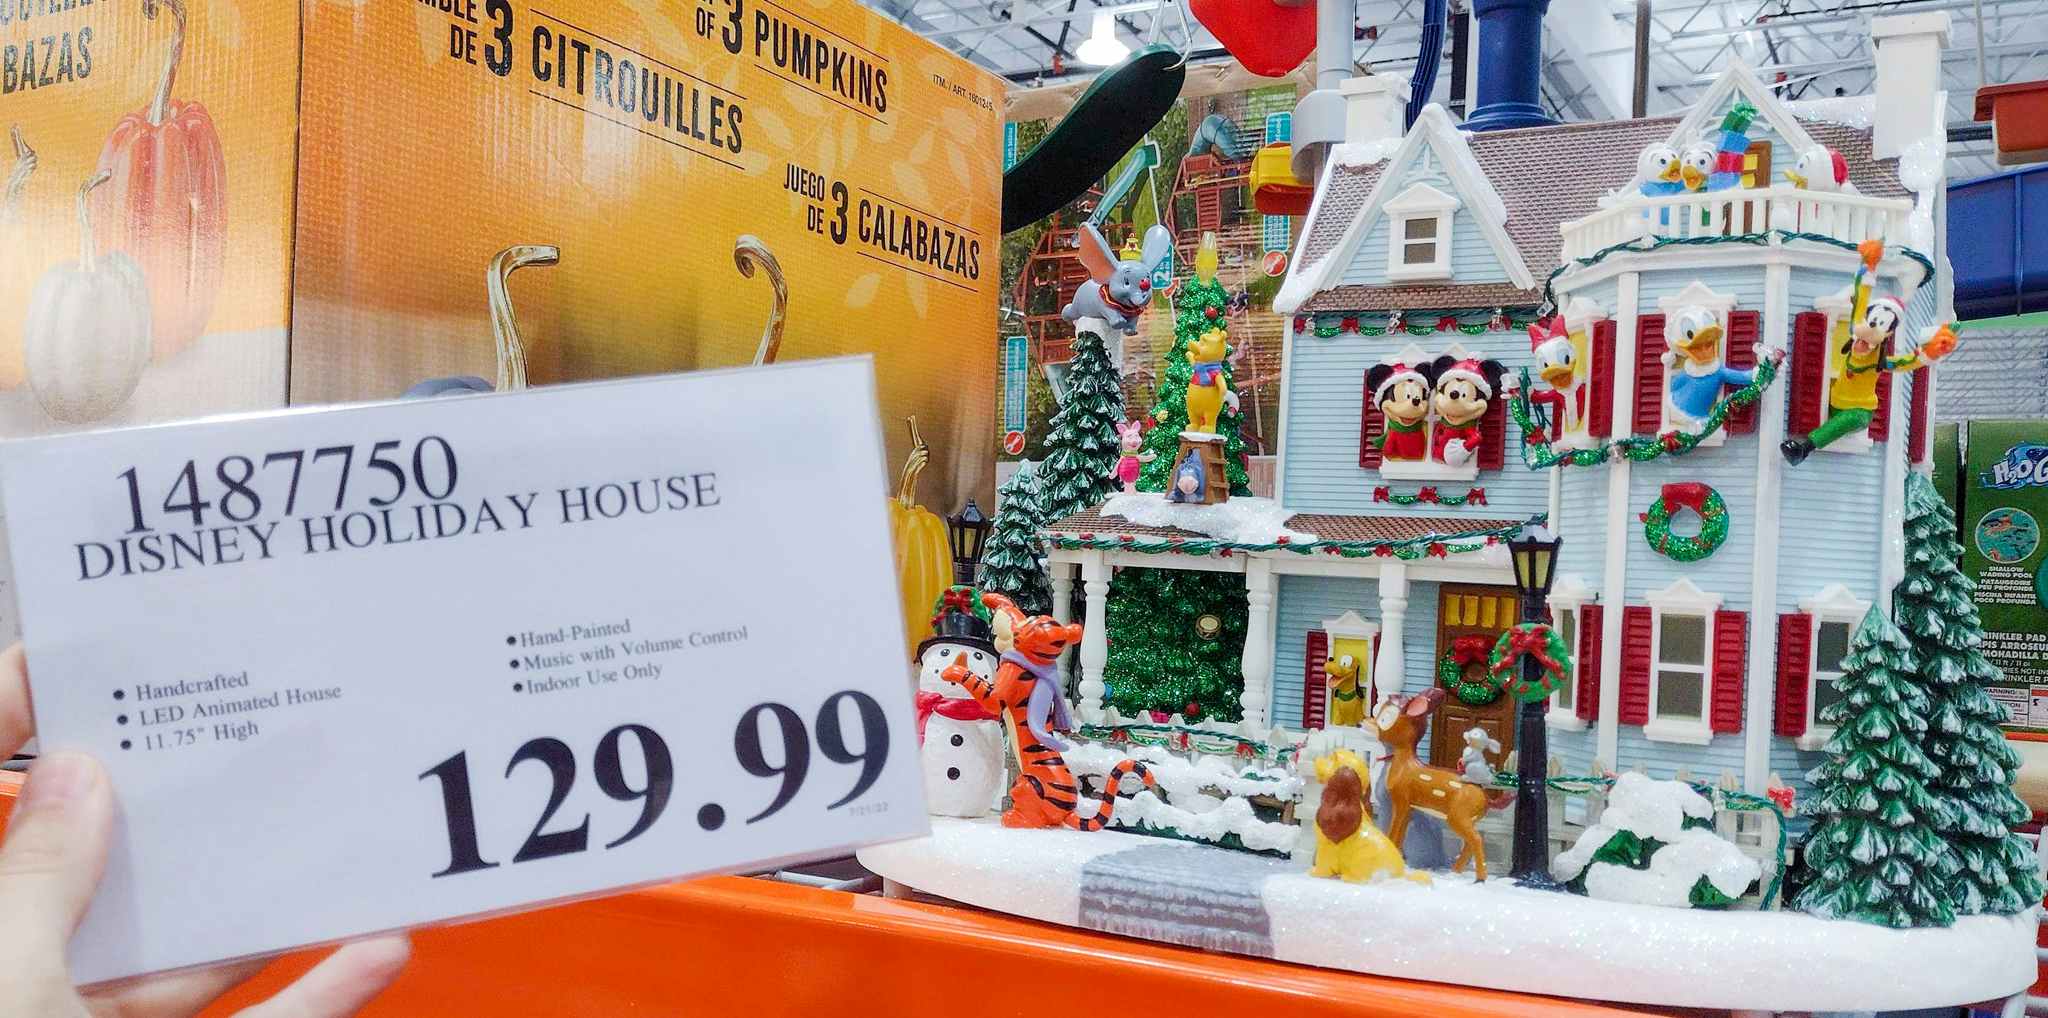 disney holiday house on display with sales sign at costco